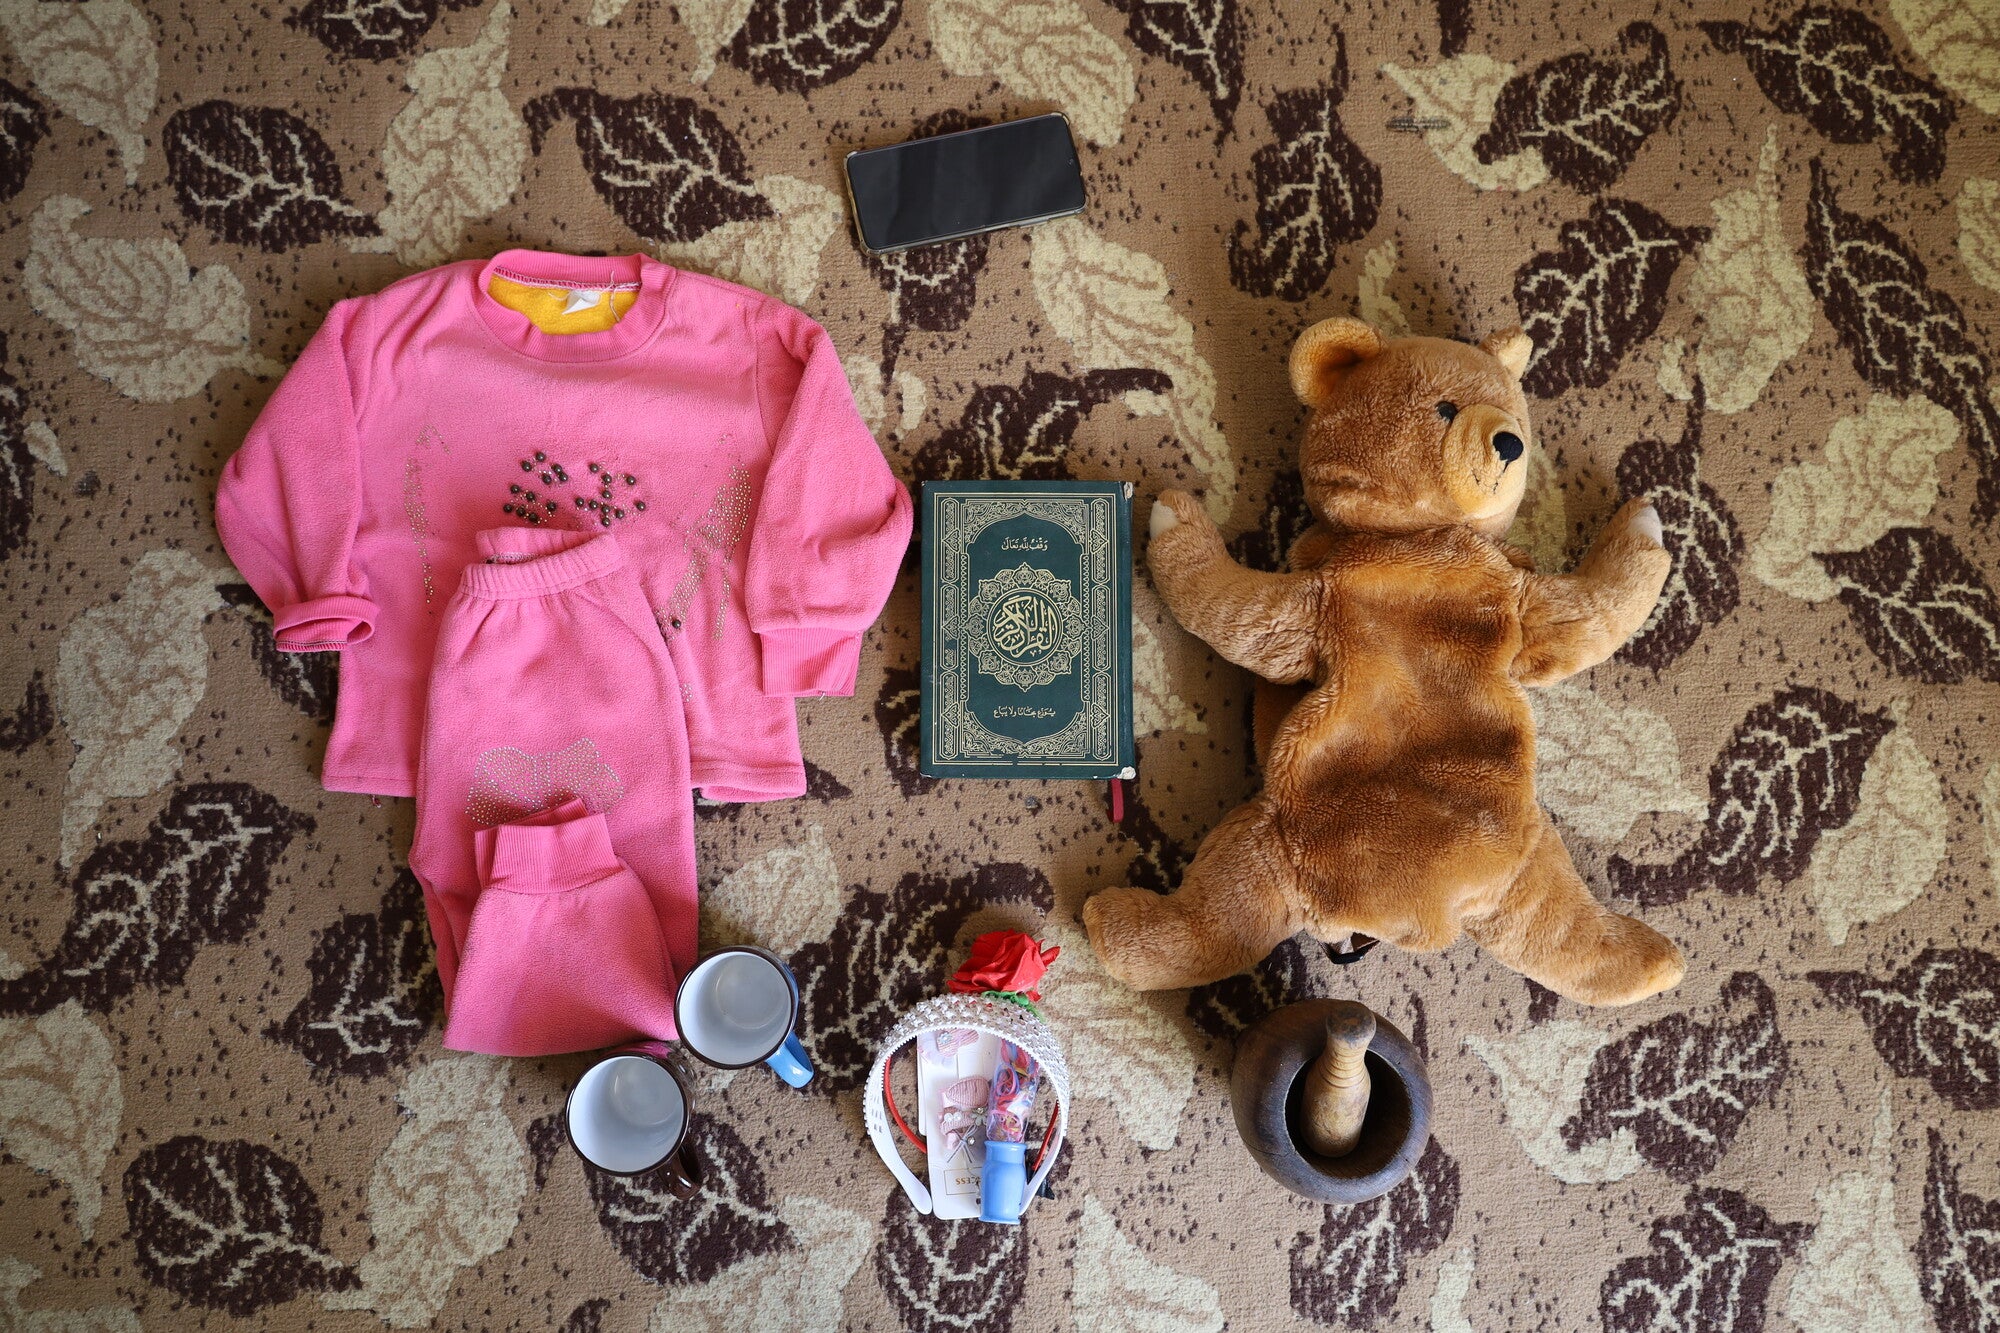 An assortment of children's items, including a stuffed bear and pajamas